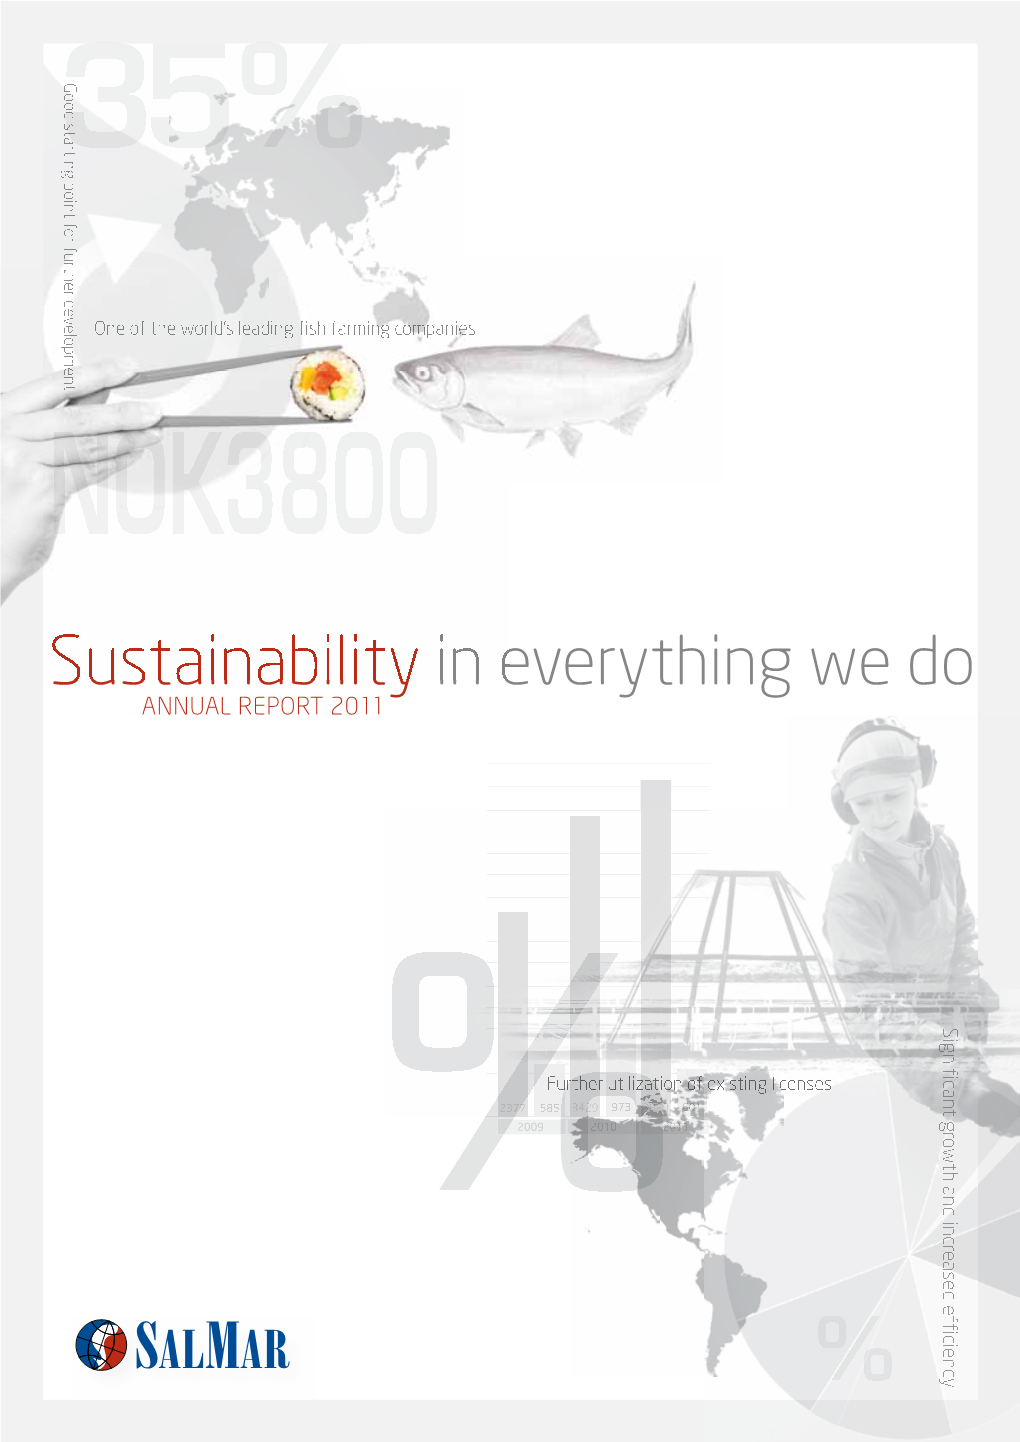 Sustainability in Everything We Do ANNUAL REPORT 2011 Signifi Cant Growth and Increased Effi Ciency